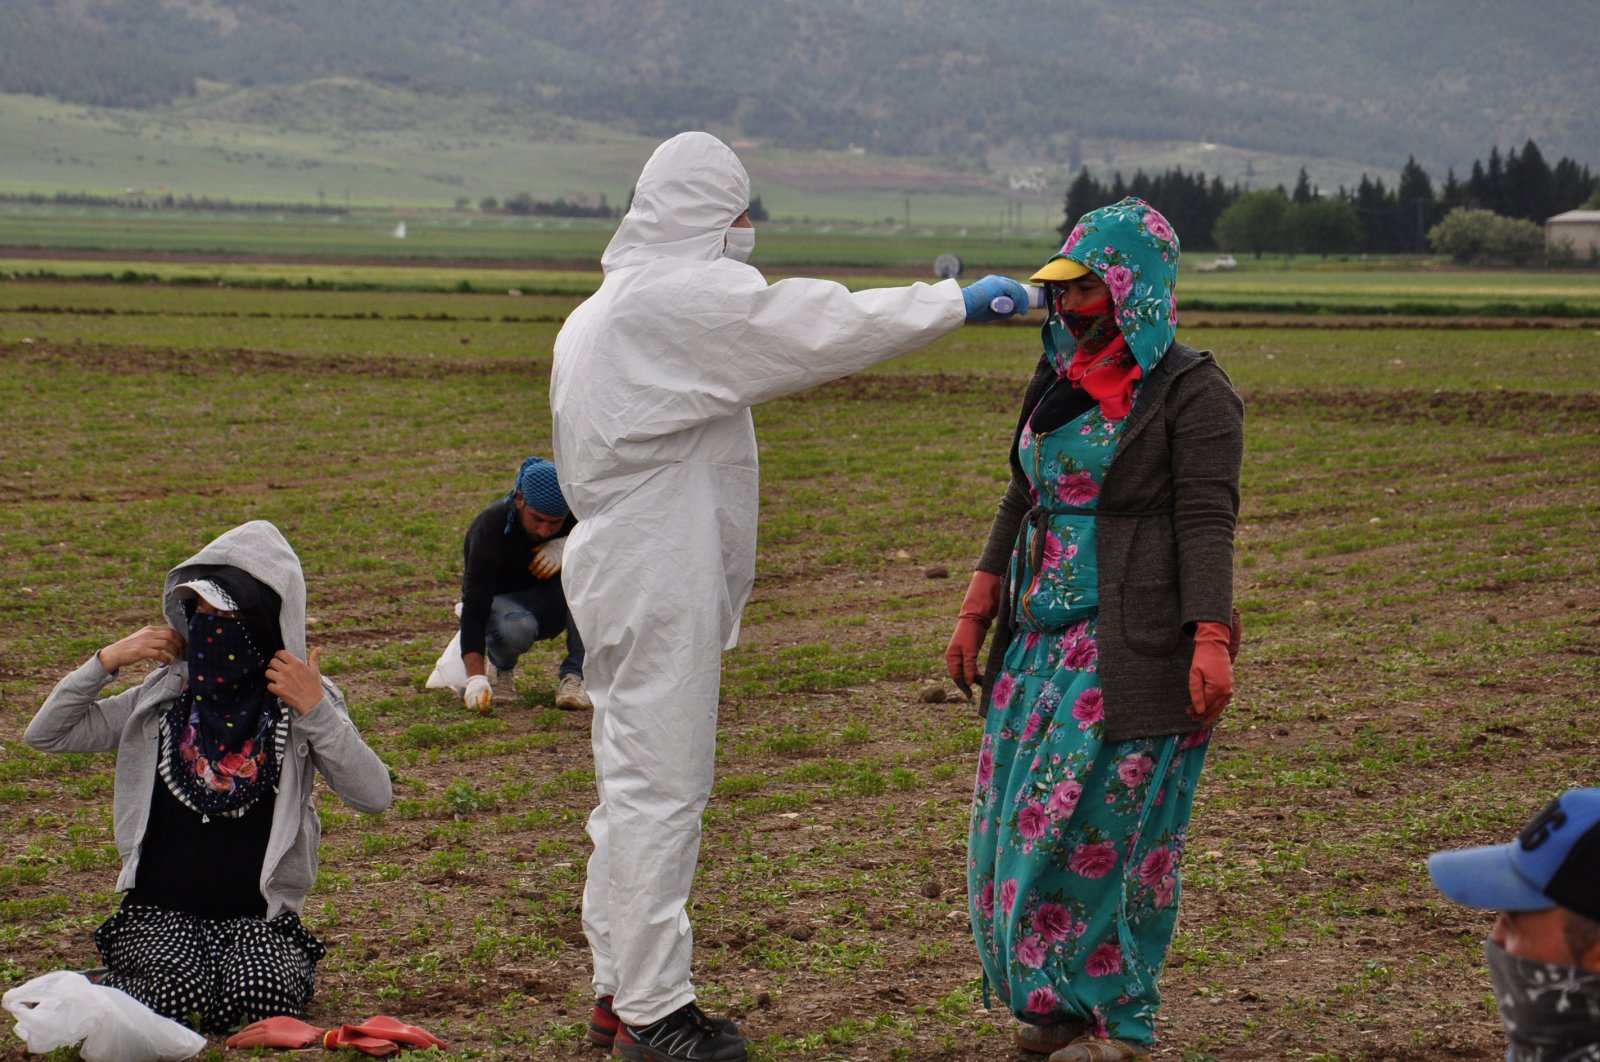 A health worker measures the temperature of seasonal workers in southeastern Gaziantep province, Turkey, April 30, 2020. (DHA Photo)